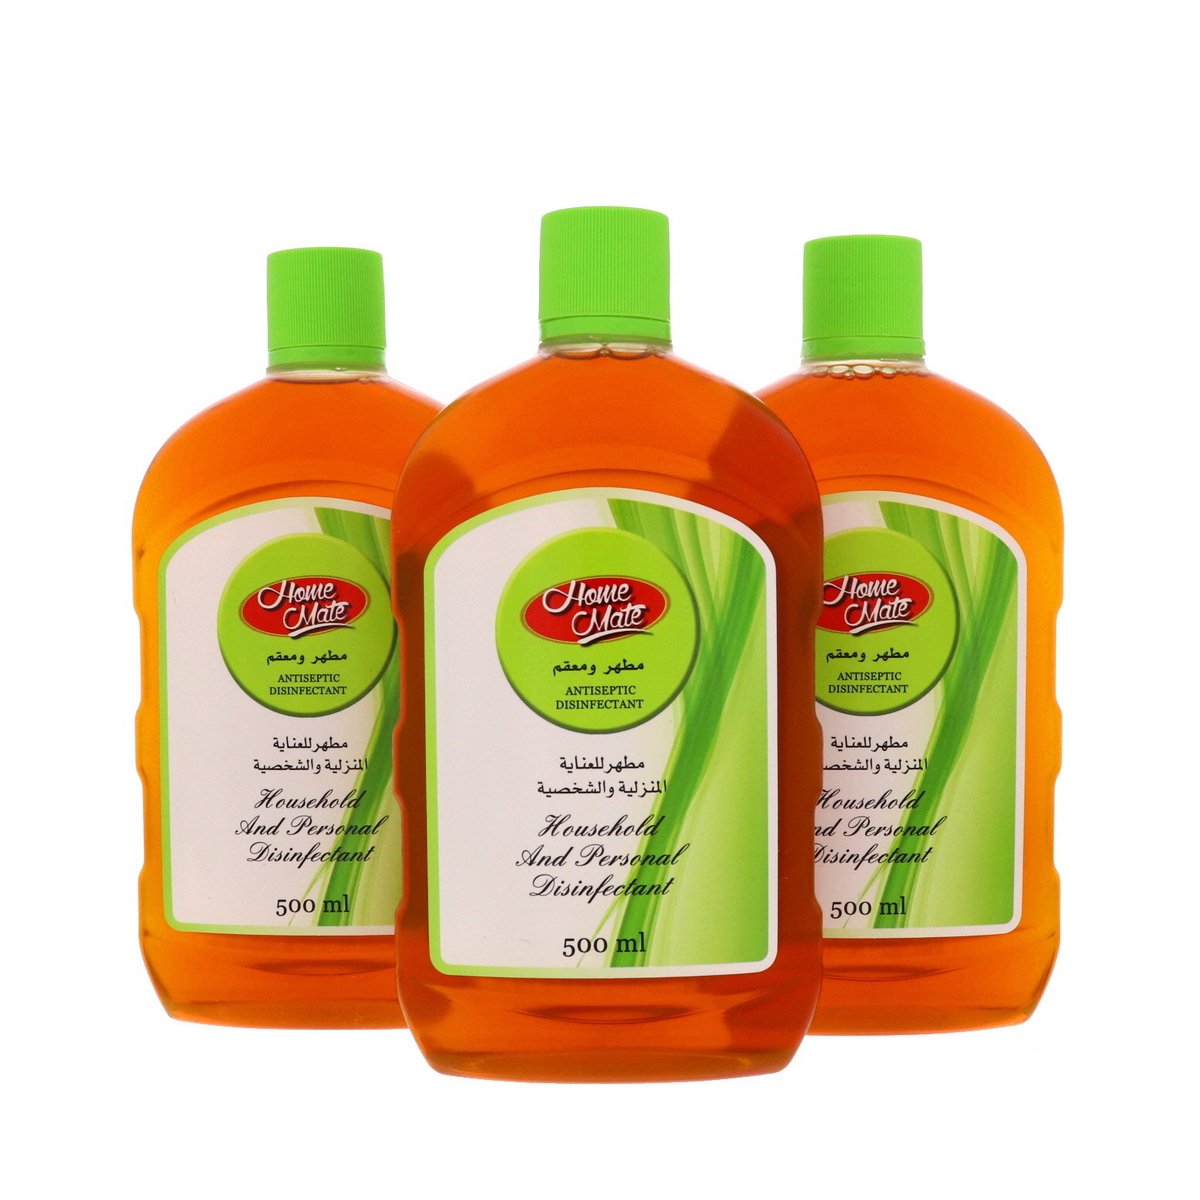 Home Mate Antiseptic Disinfectant 3 x 500ml